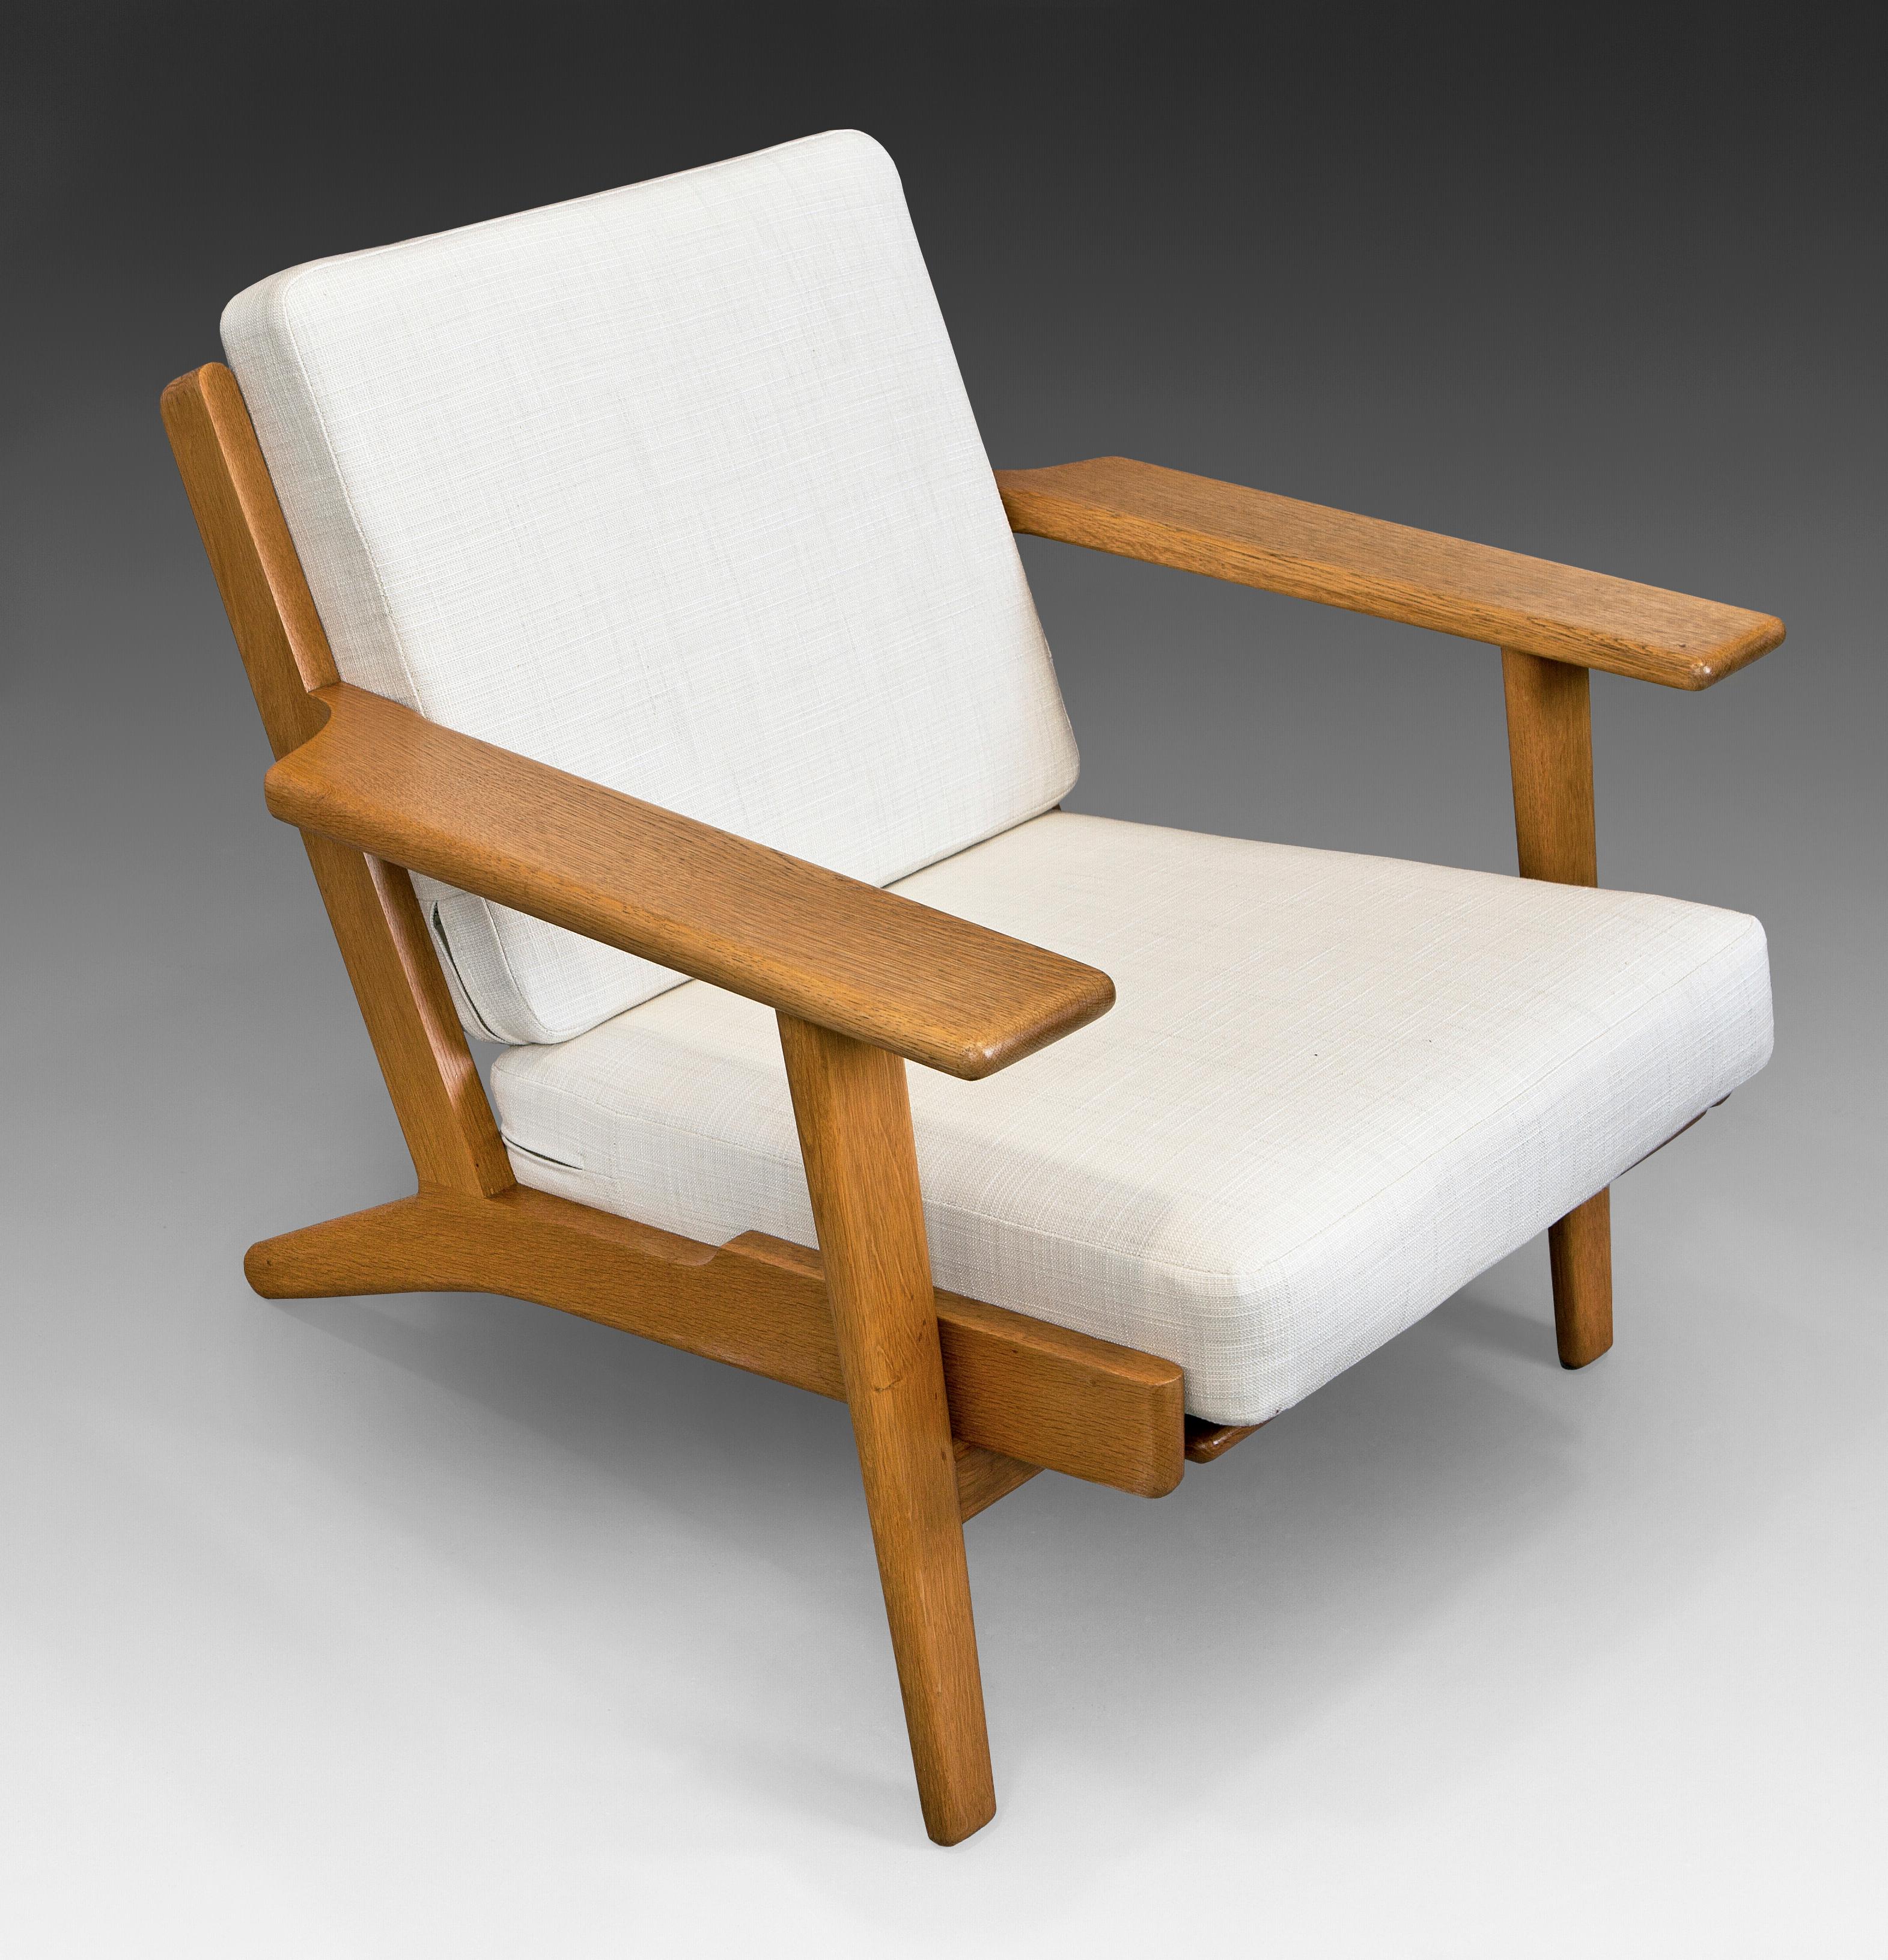 G290 armchair in solid oak and upholstery designed by Hans J. Wegner for Getama. Model G290 high backrest also available, see pictures for more info.
Denmark, 1950s. Completely restored and reupholstered with their original cushions.